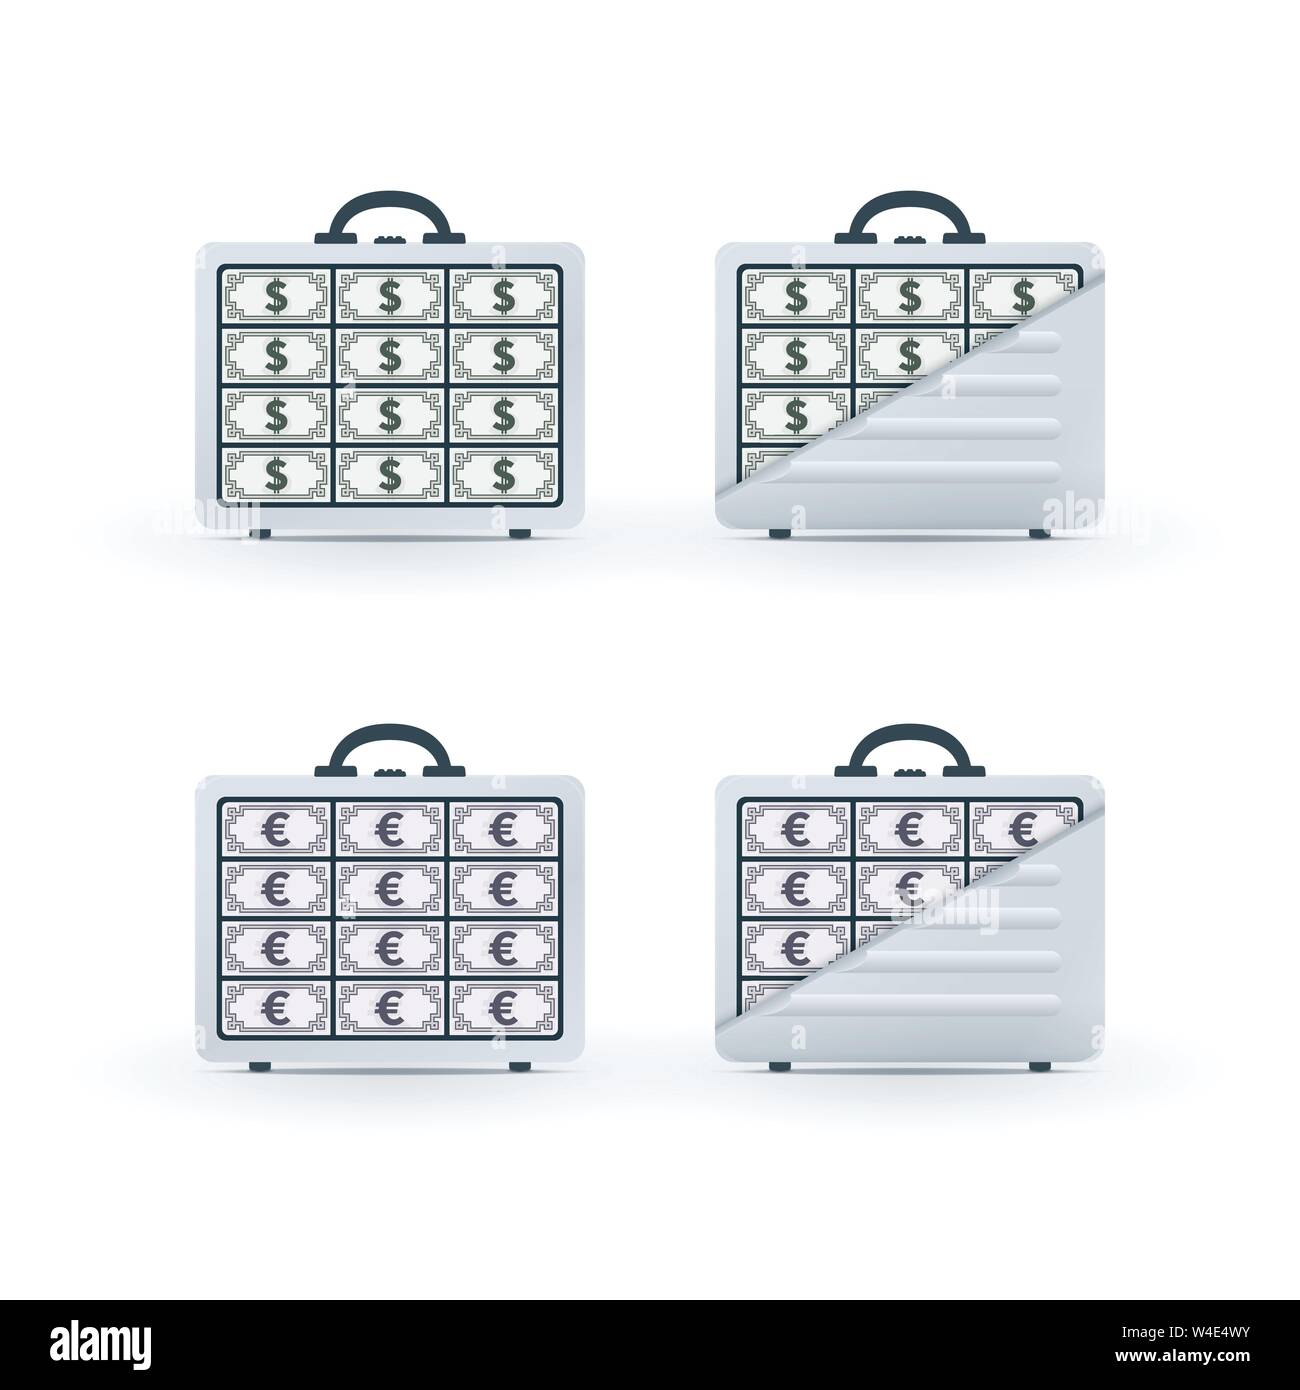 Briefcases full banknotes. Financial vector icons on white background. Stock Vector